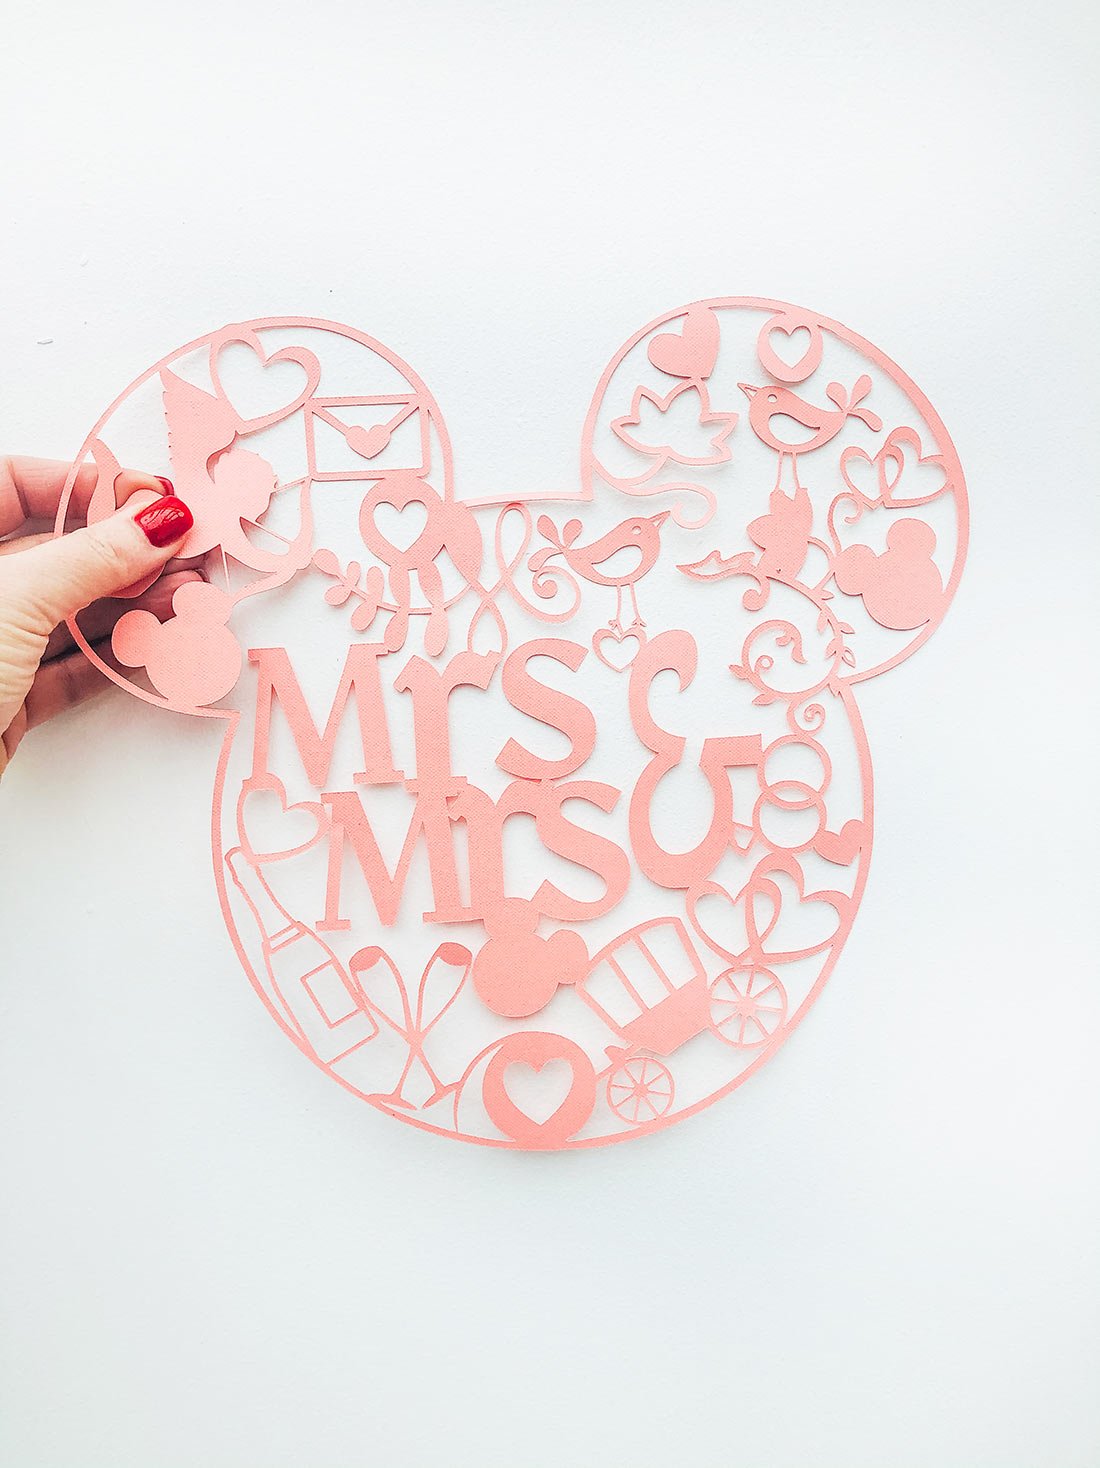 Brides Mickey Mouse Cut File for Wedding Decorations_